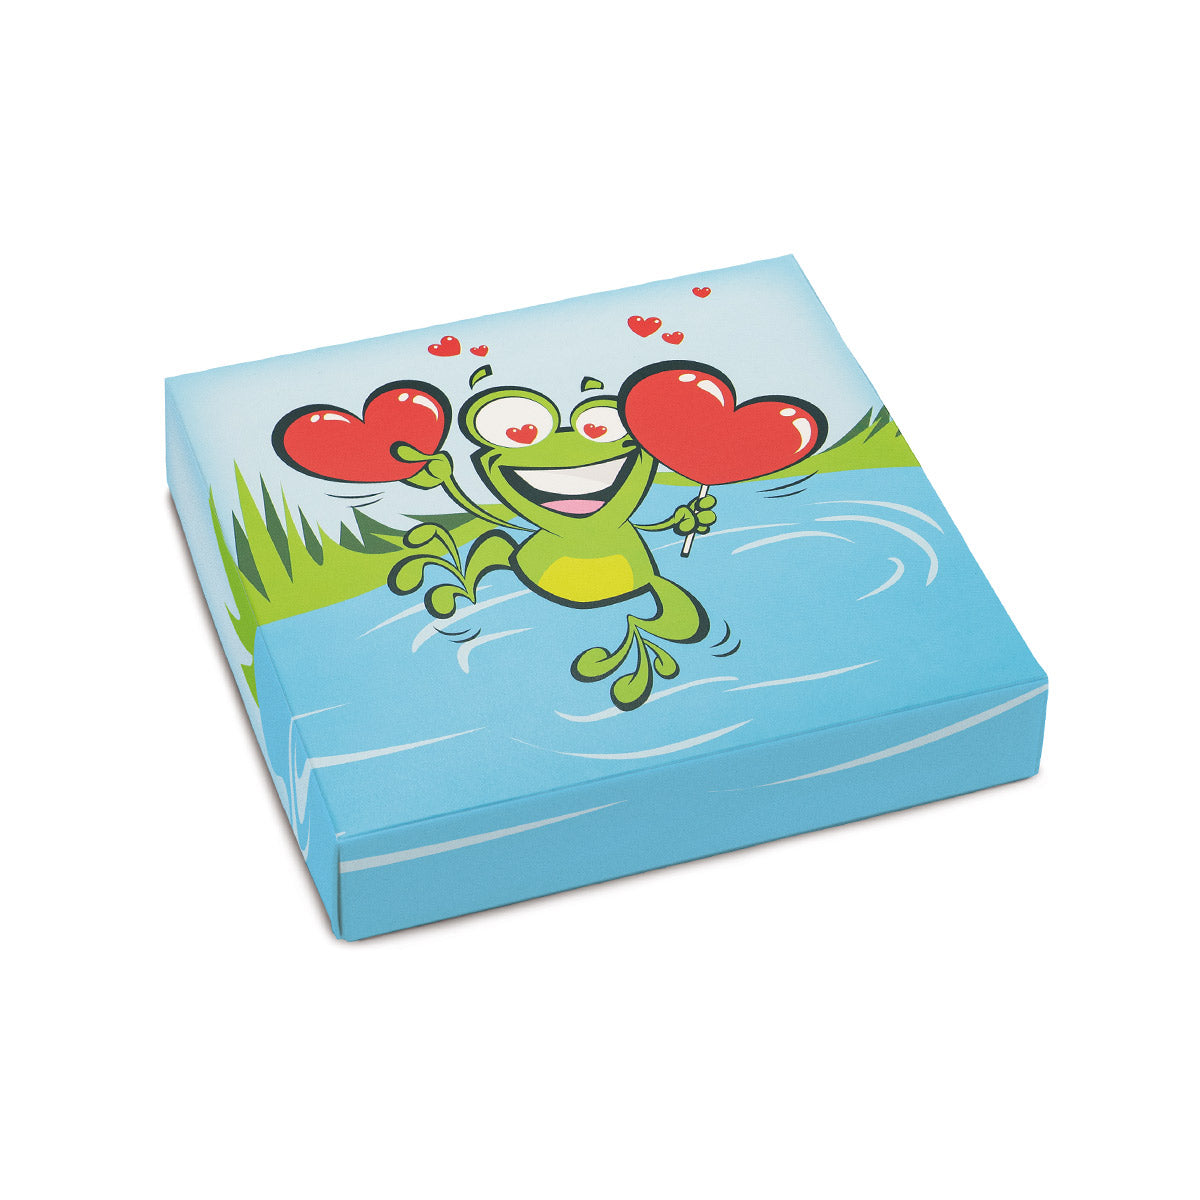 Cartoon Frog Themed Box Cover for 9 Piece Holiday Assortment